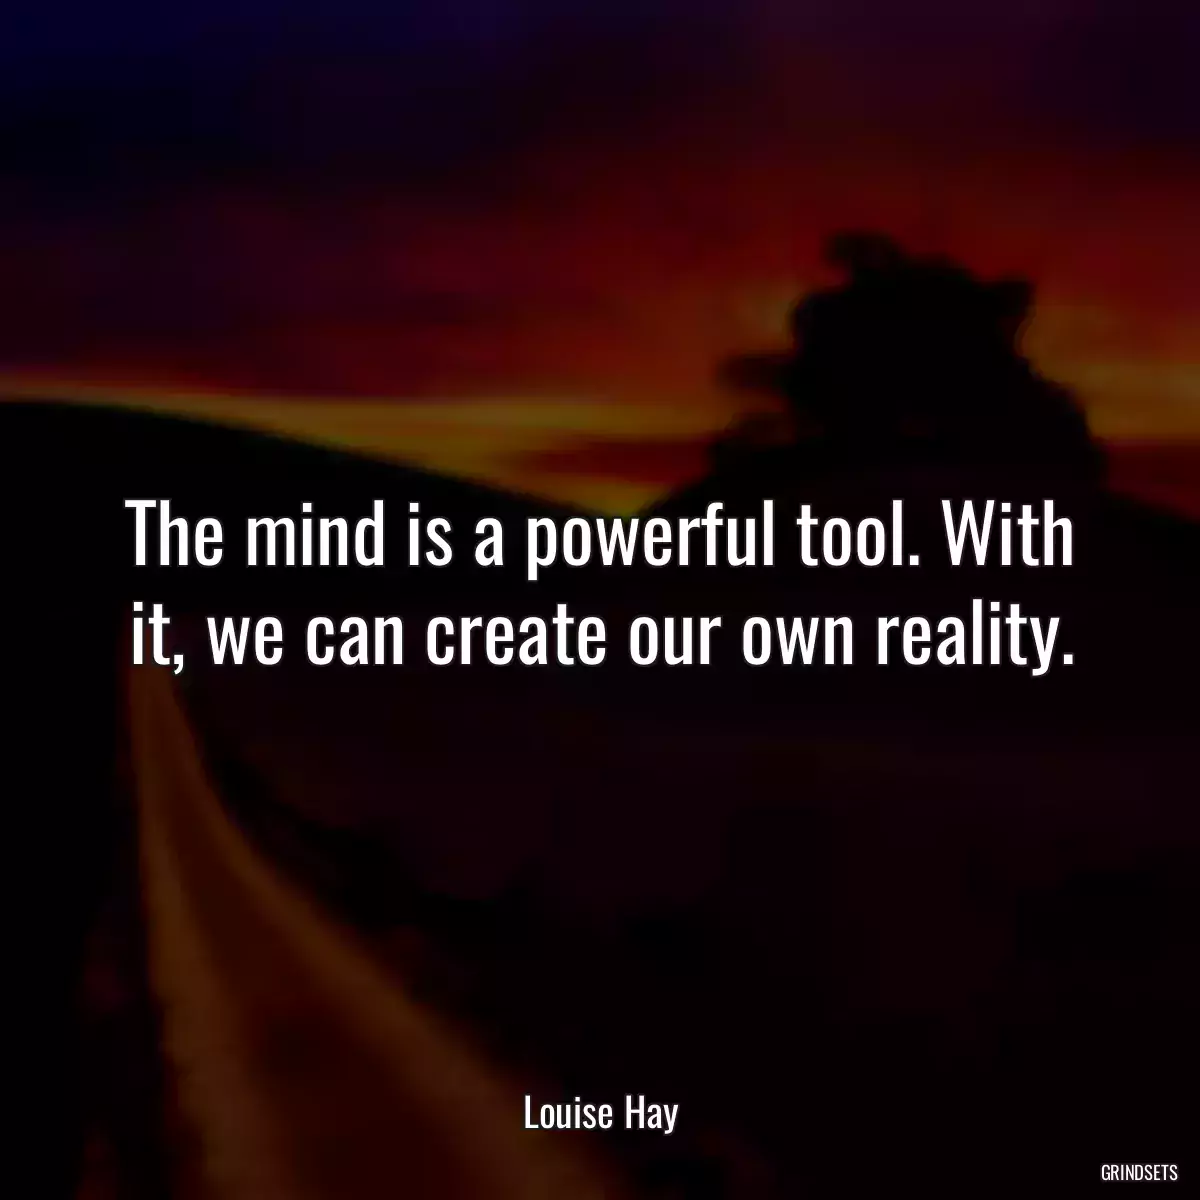 The mind is a powerful tool. With it, we can create our own reality.